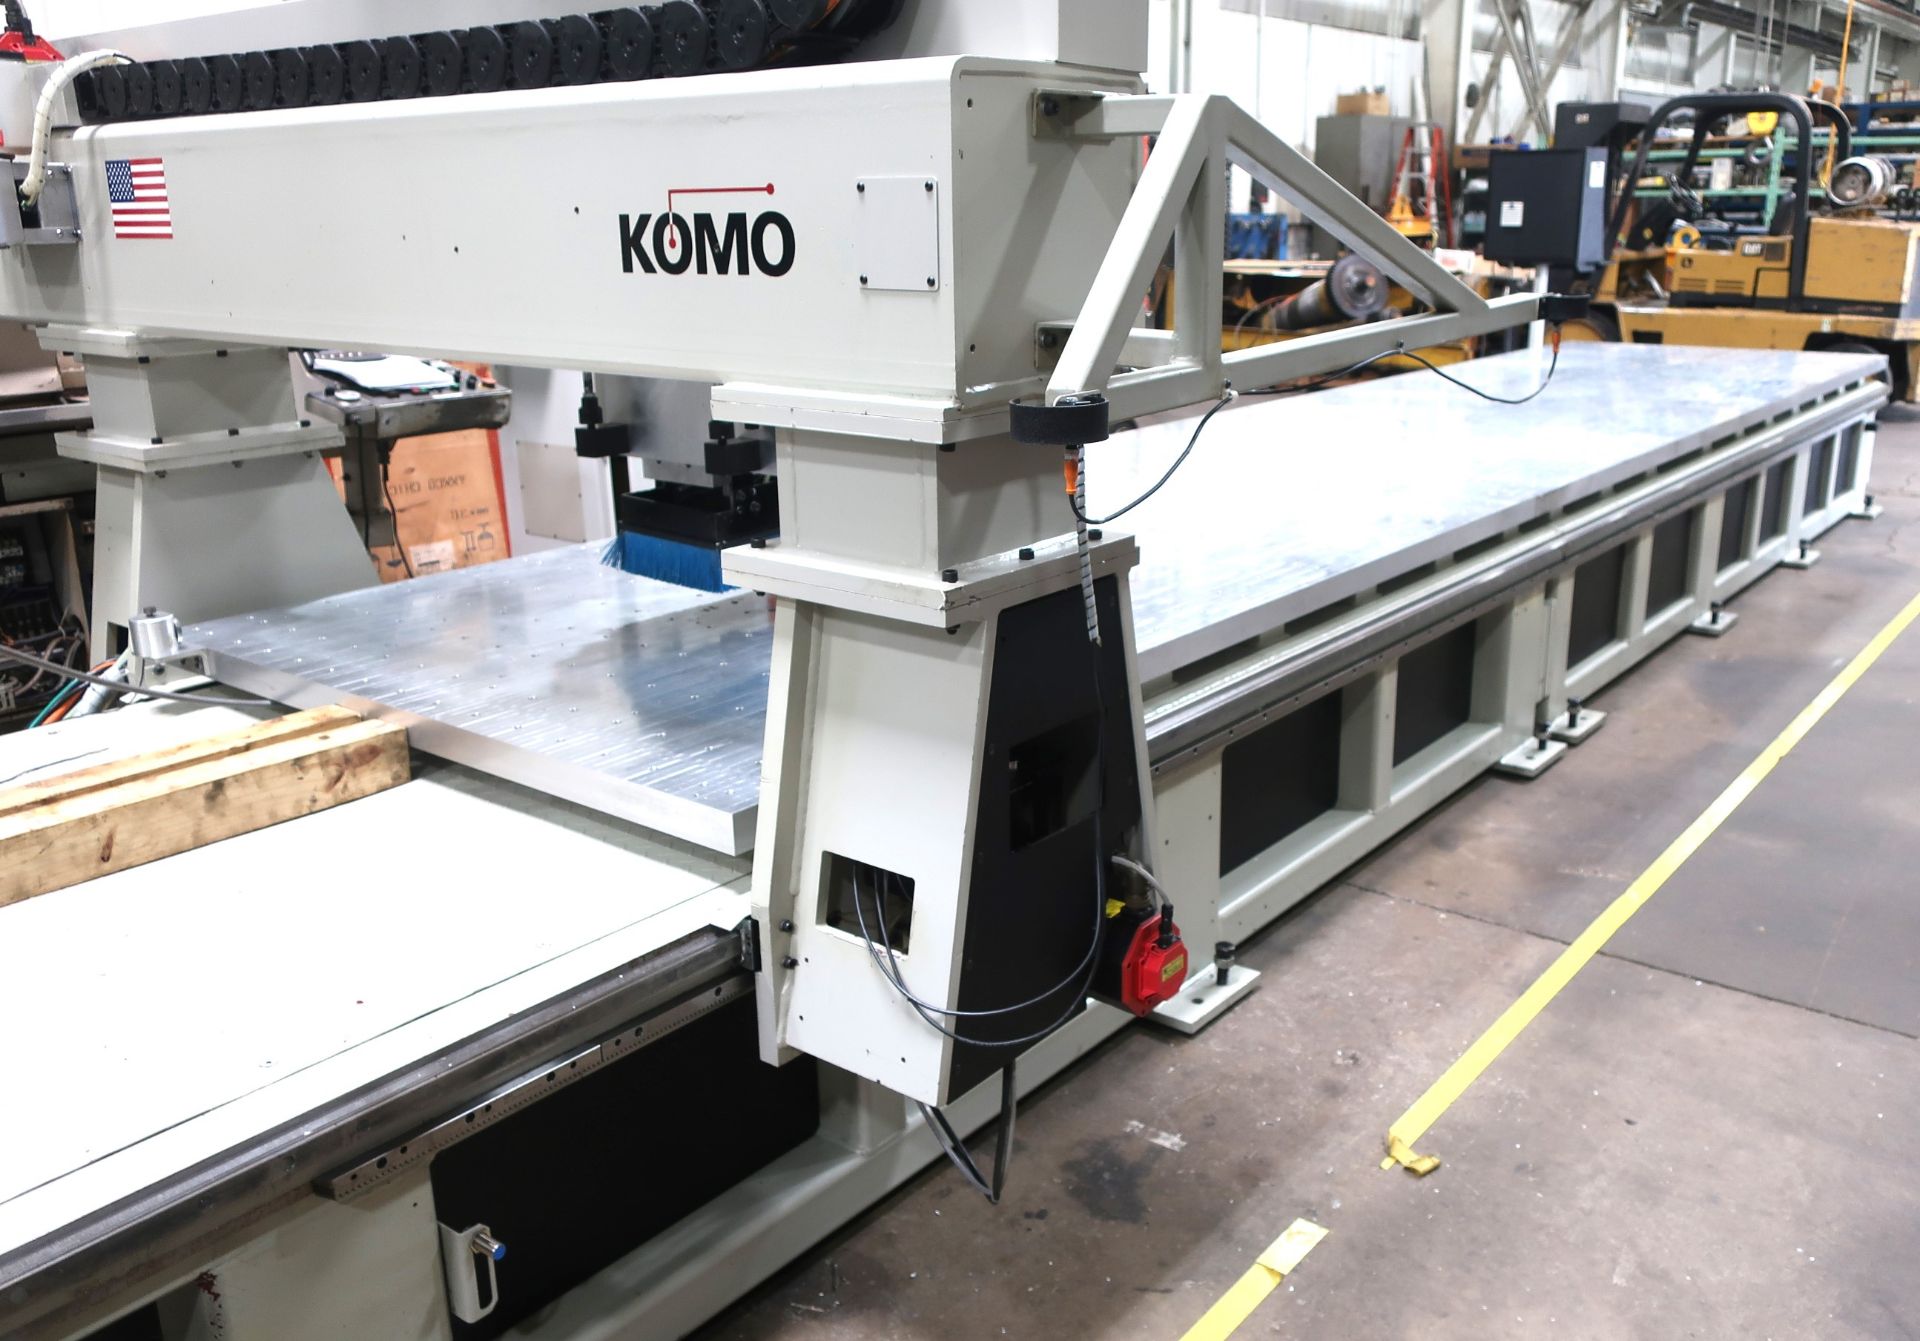 5'X24' KOMO XL-524 4-AXIS CNC ROUTER, S/N 01202-14, NEW 2015 - Image 10 of 16